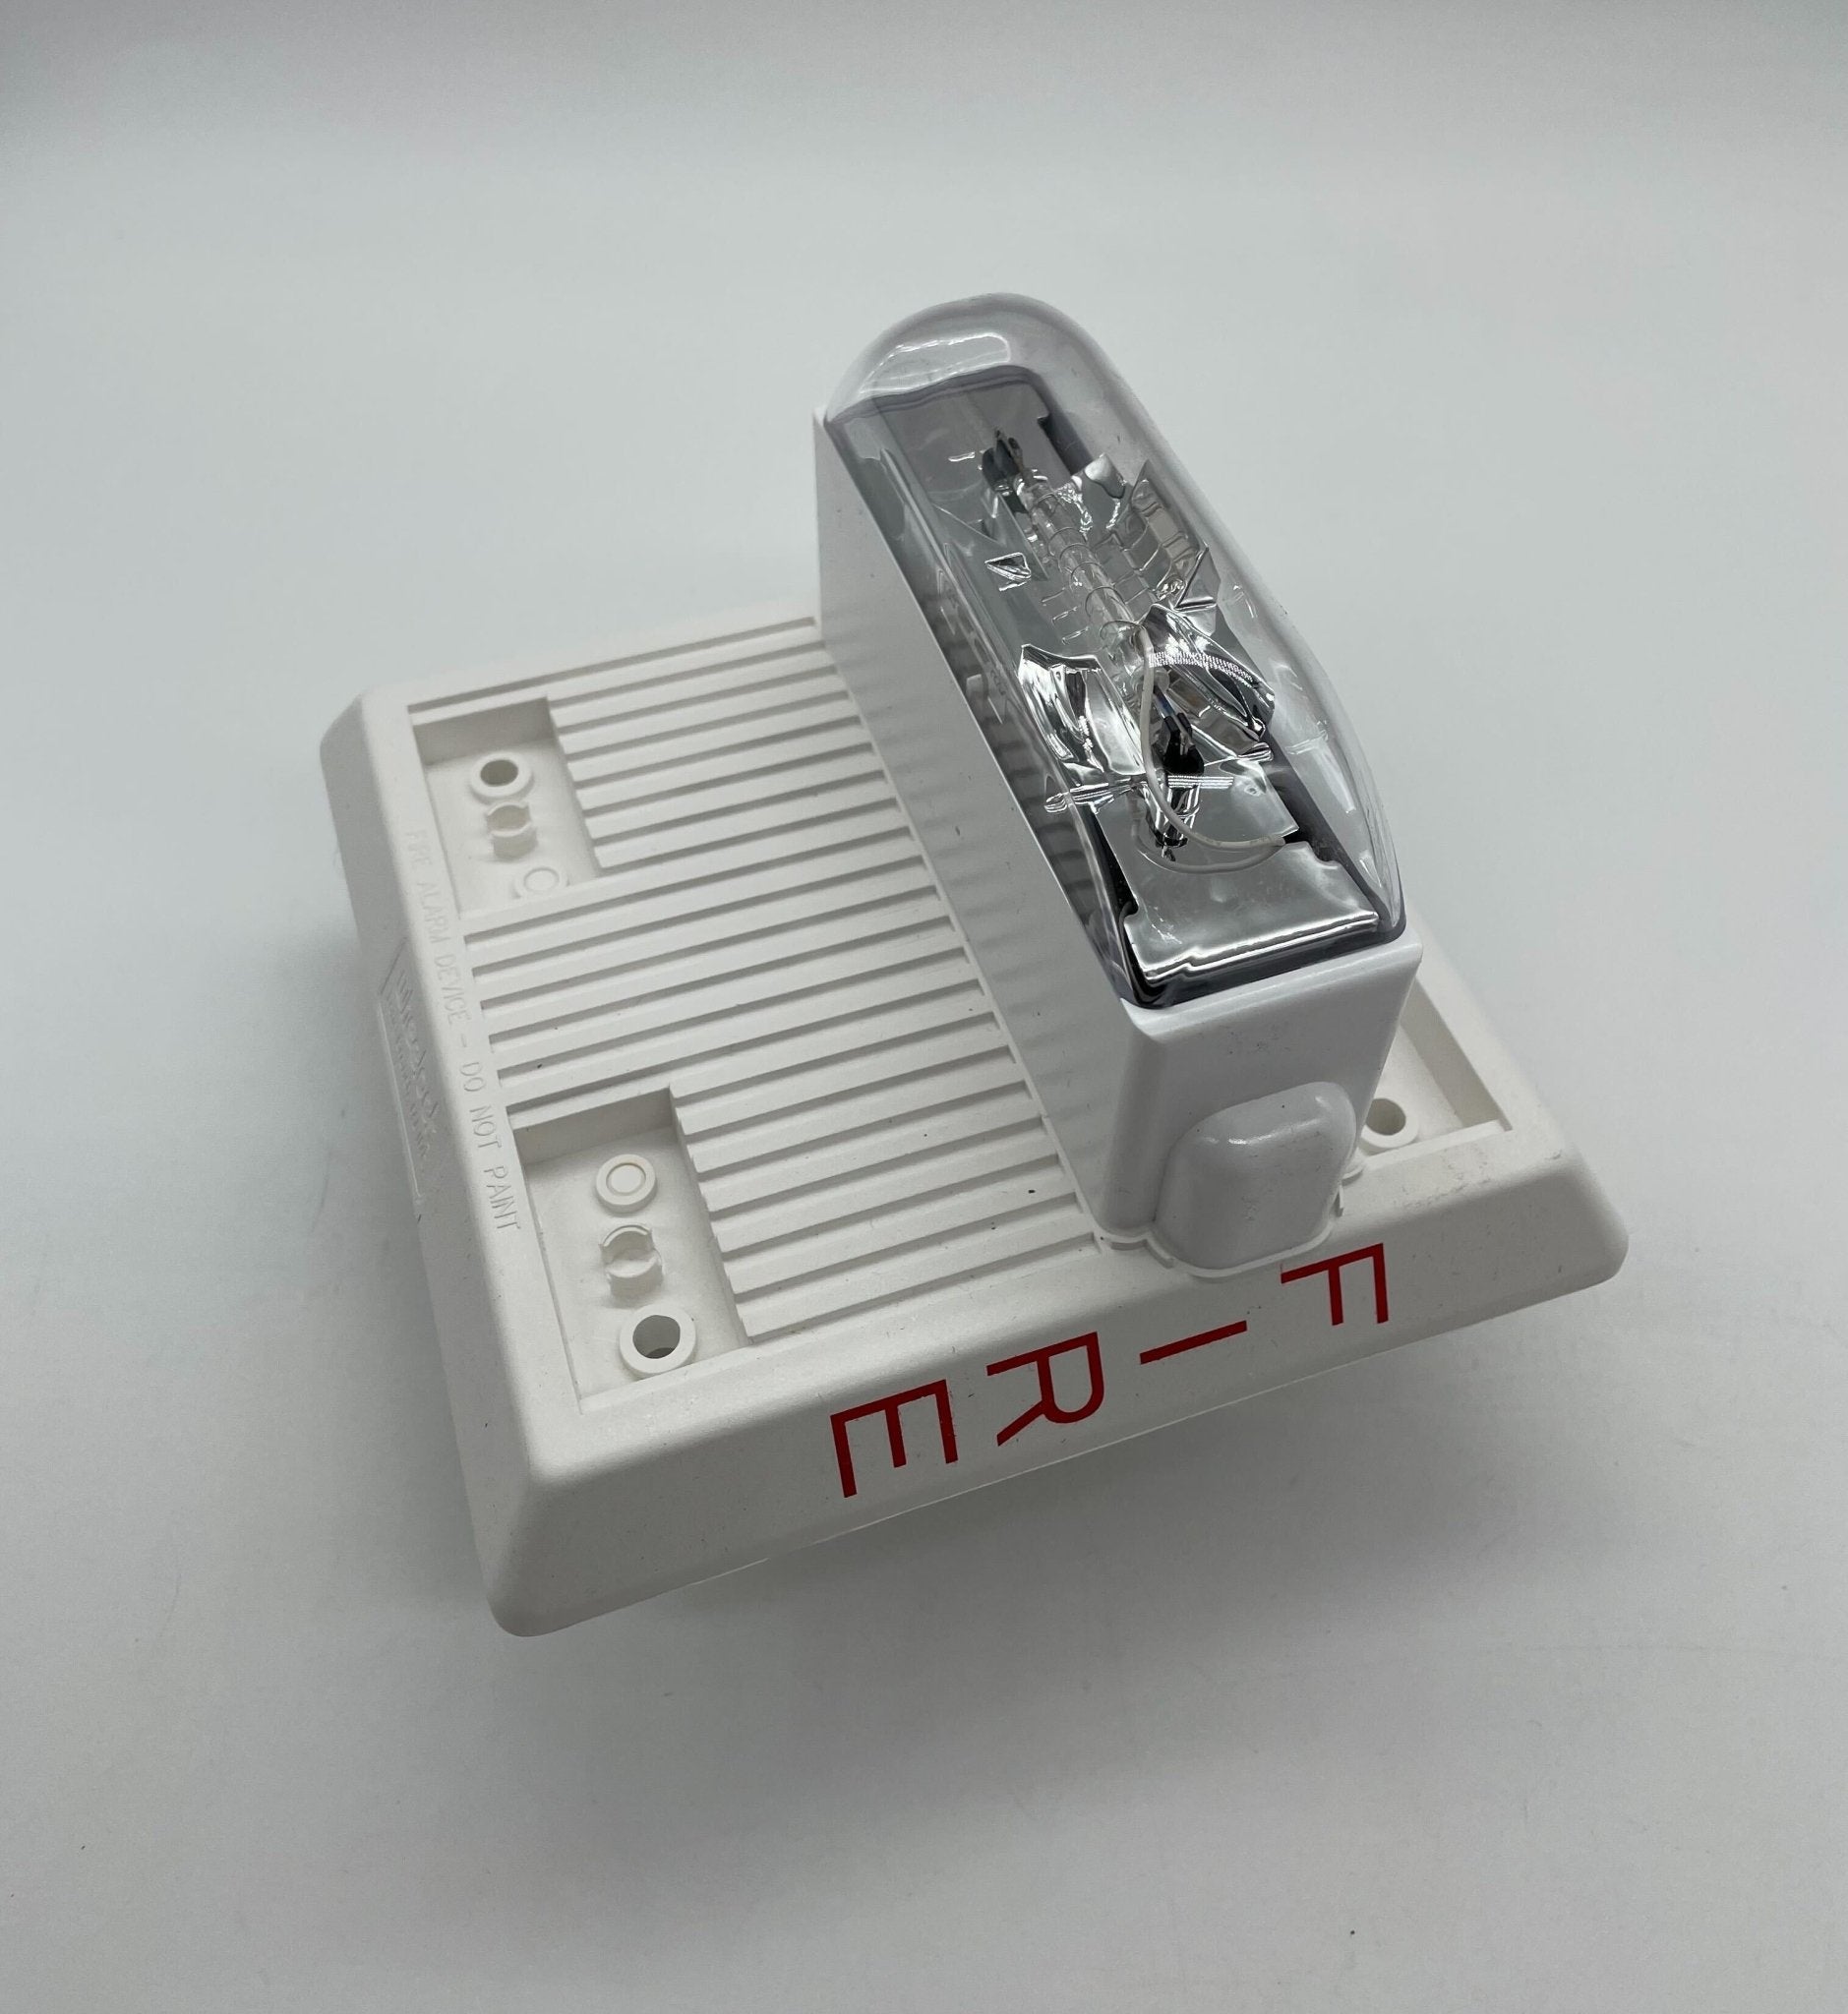 Wheelock HS4-24MCWH-FW - The Fire Alarm Supplier